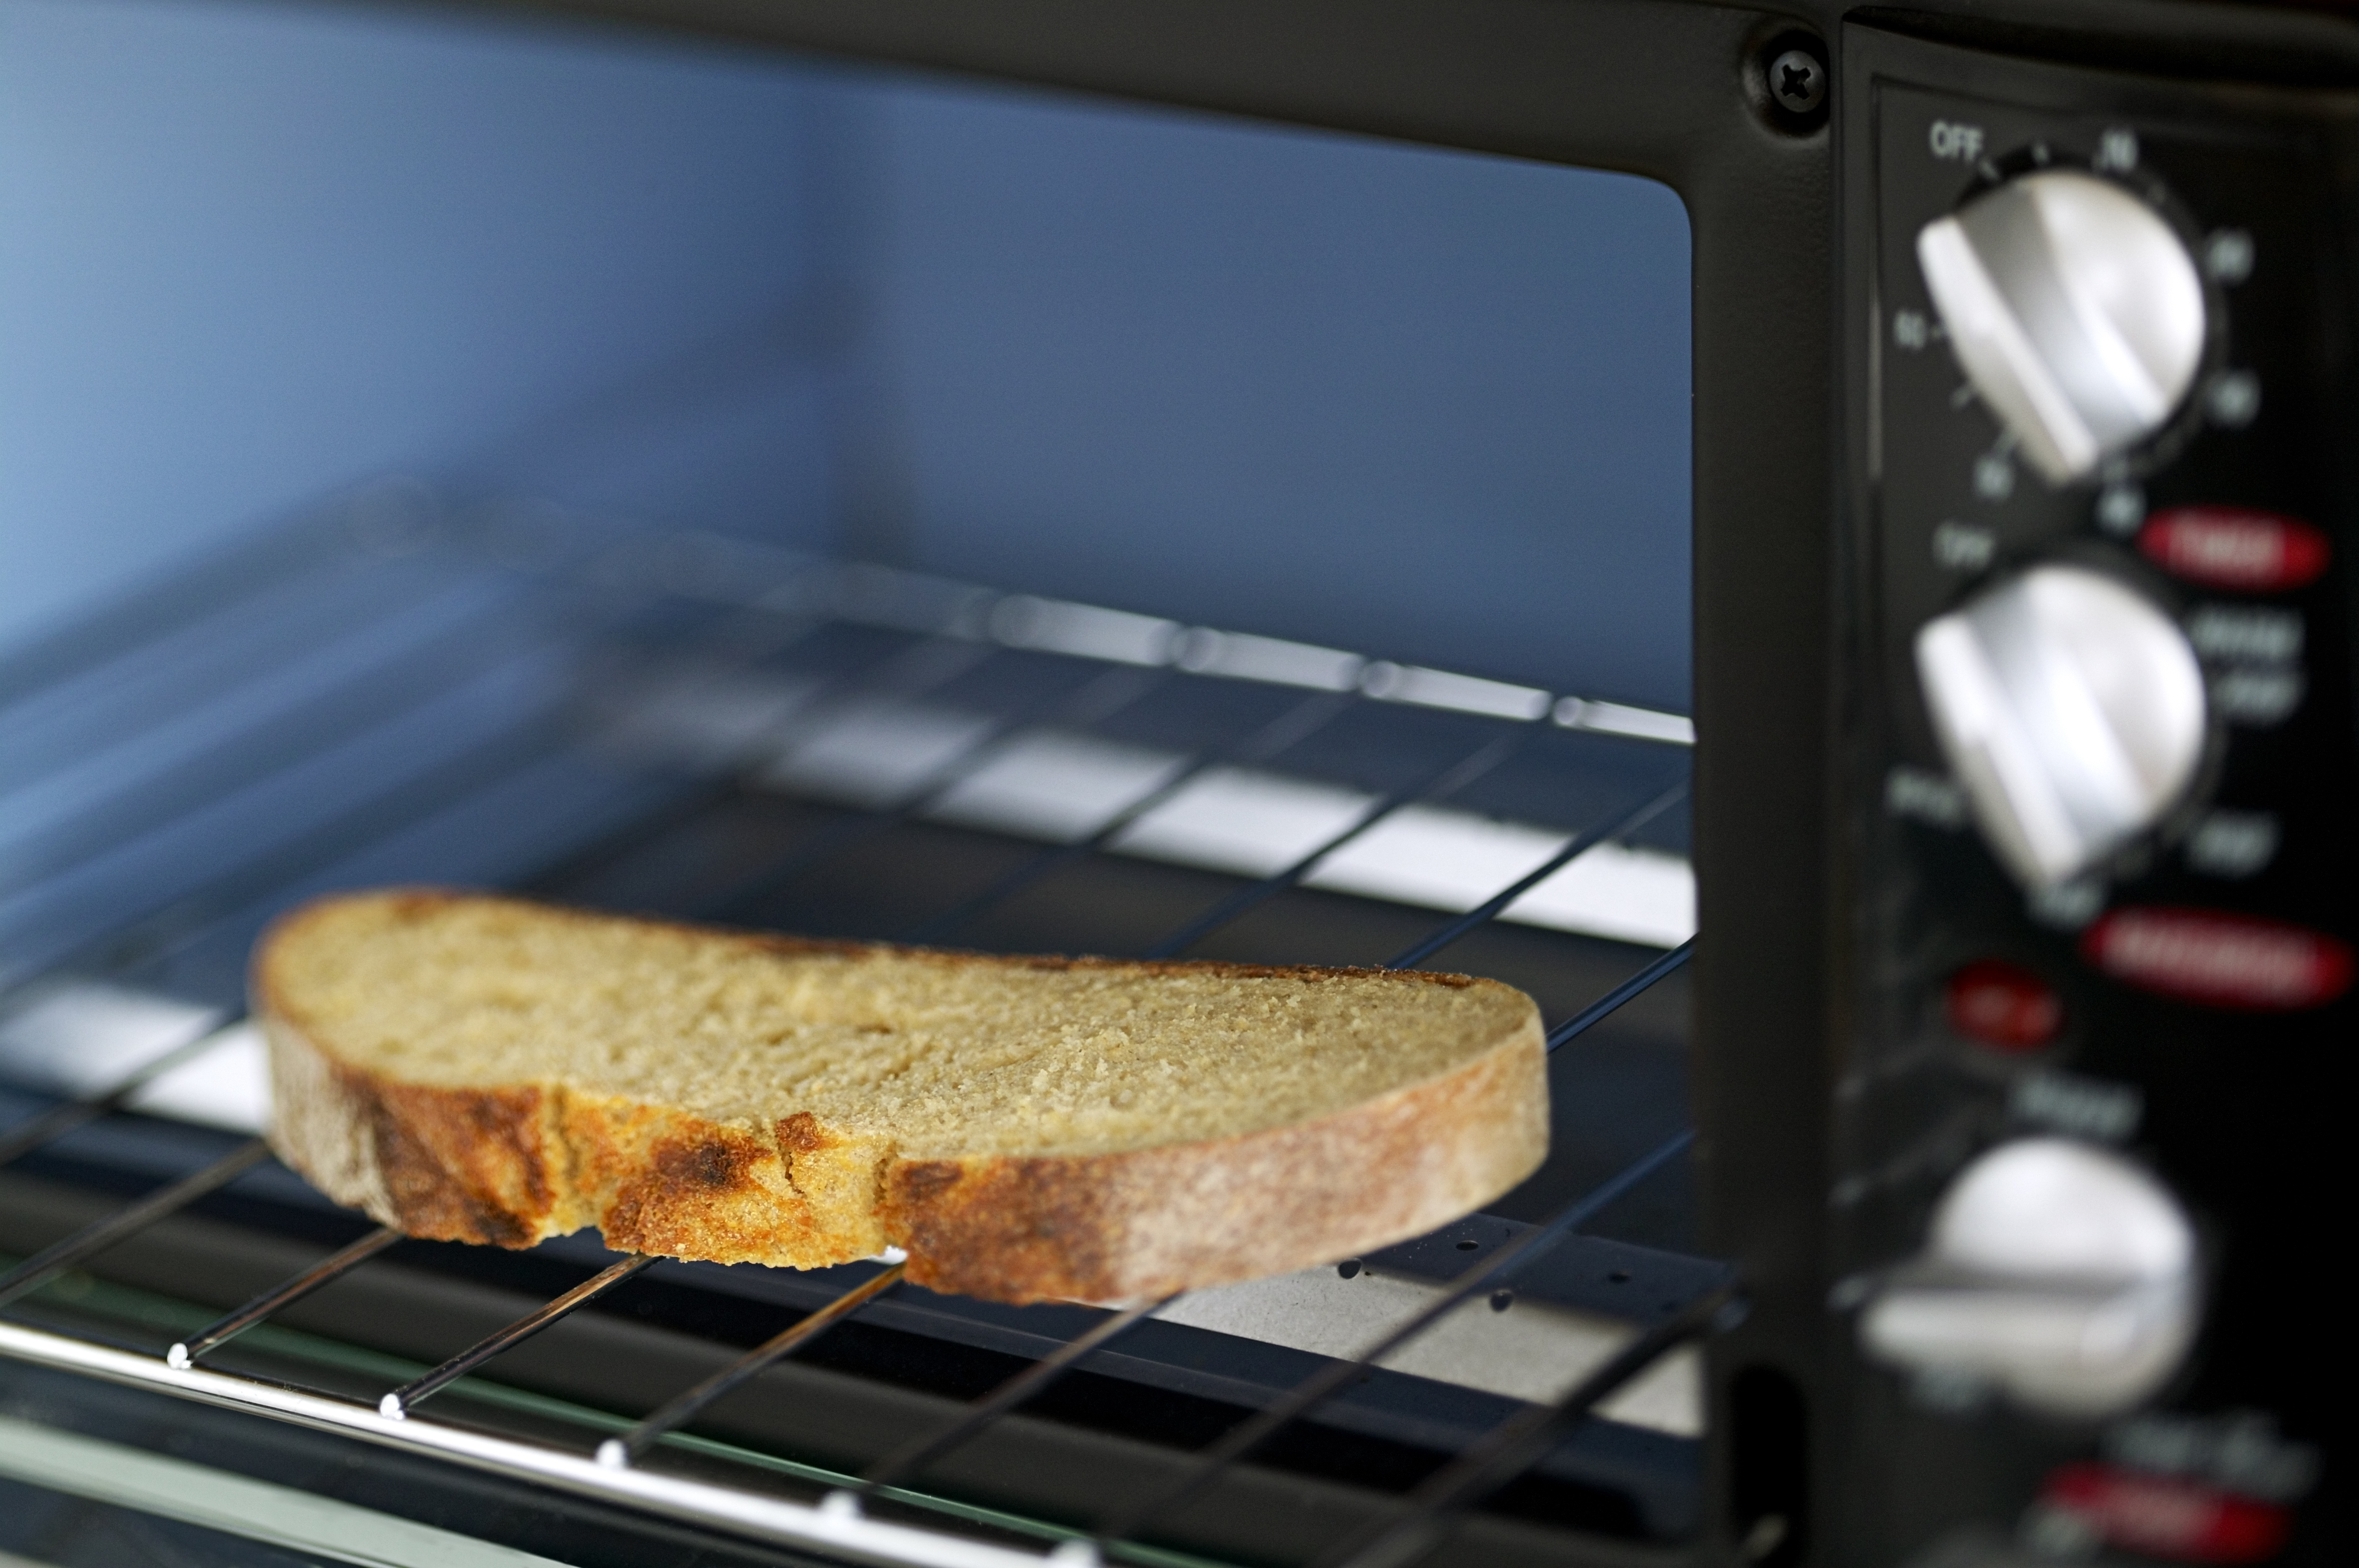 How to use a toaster oven